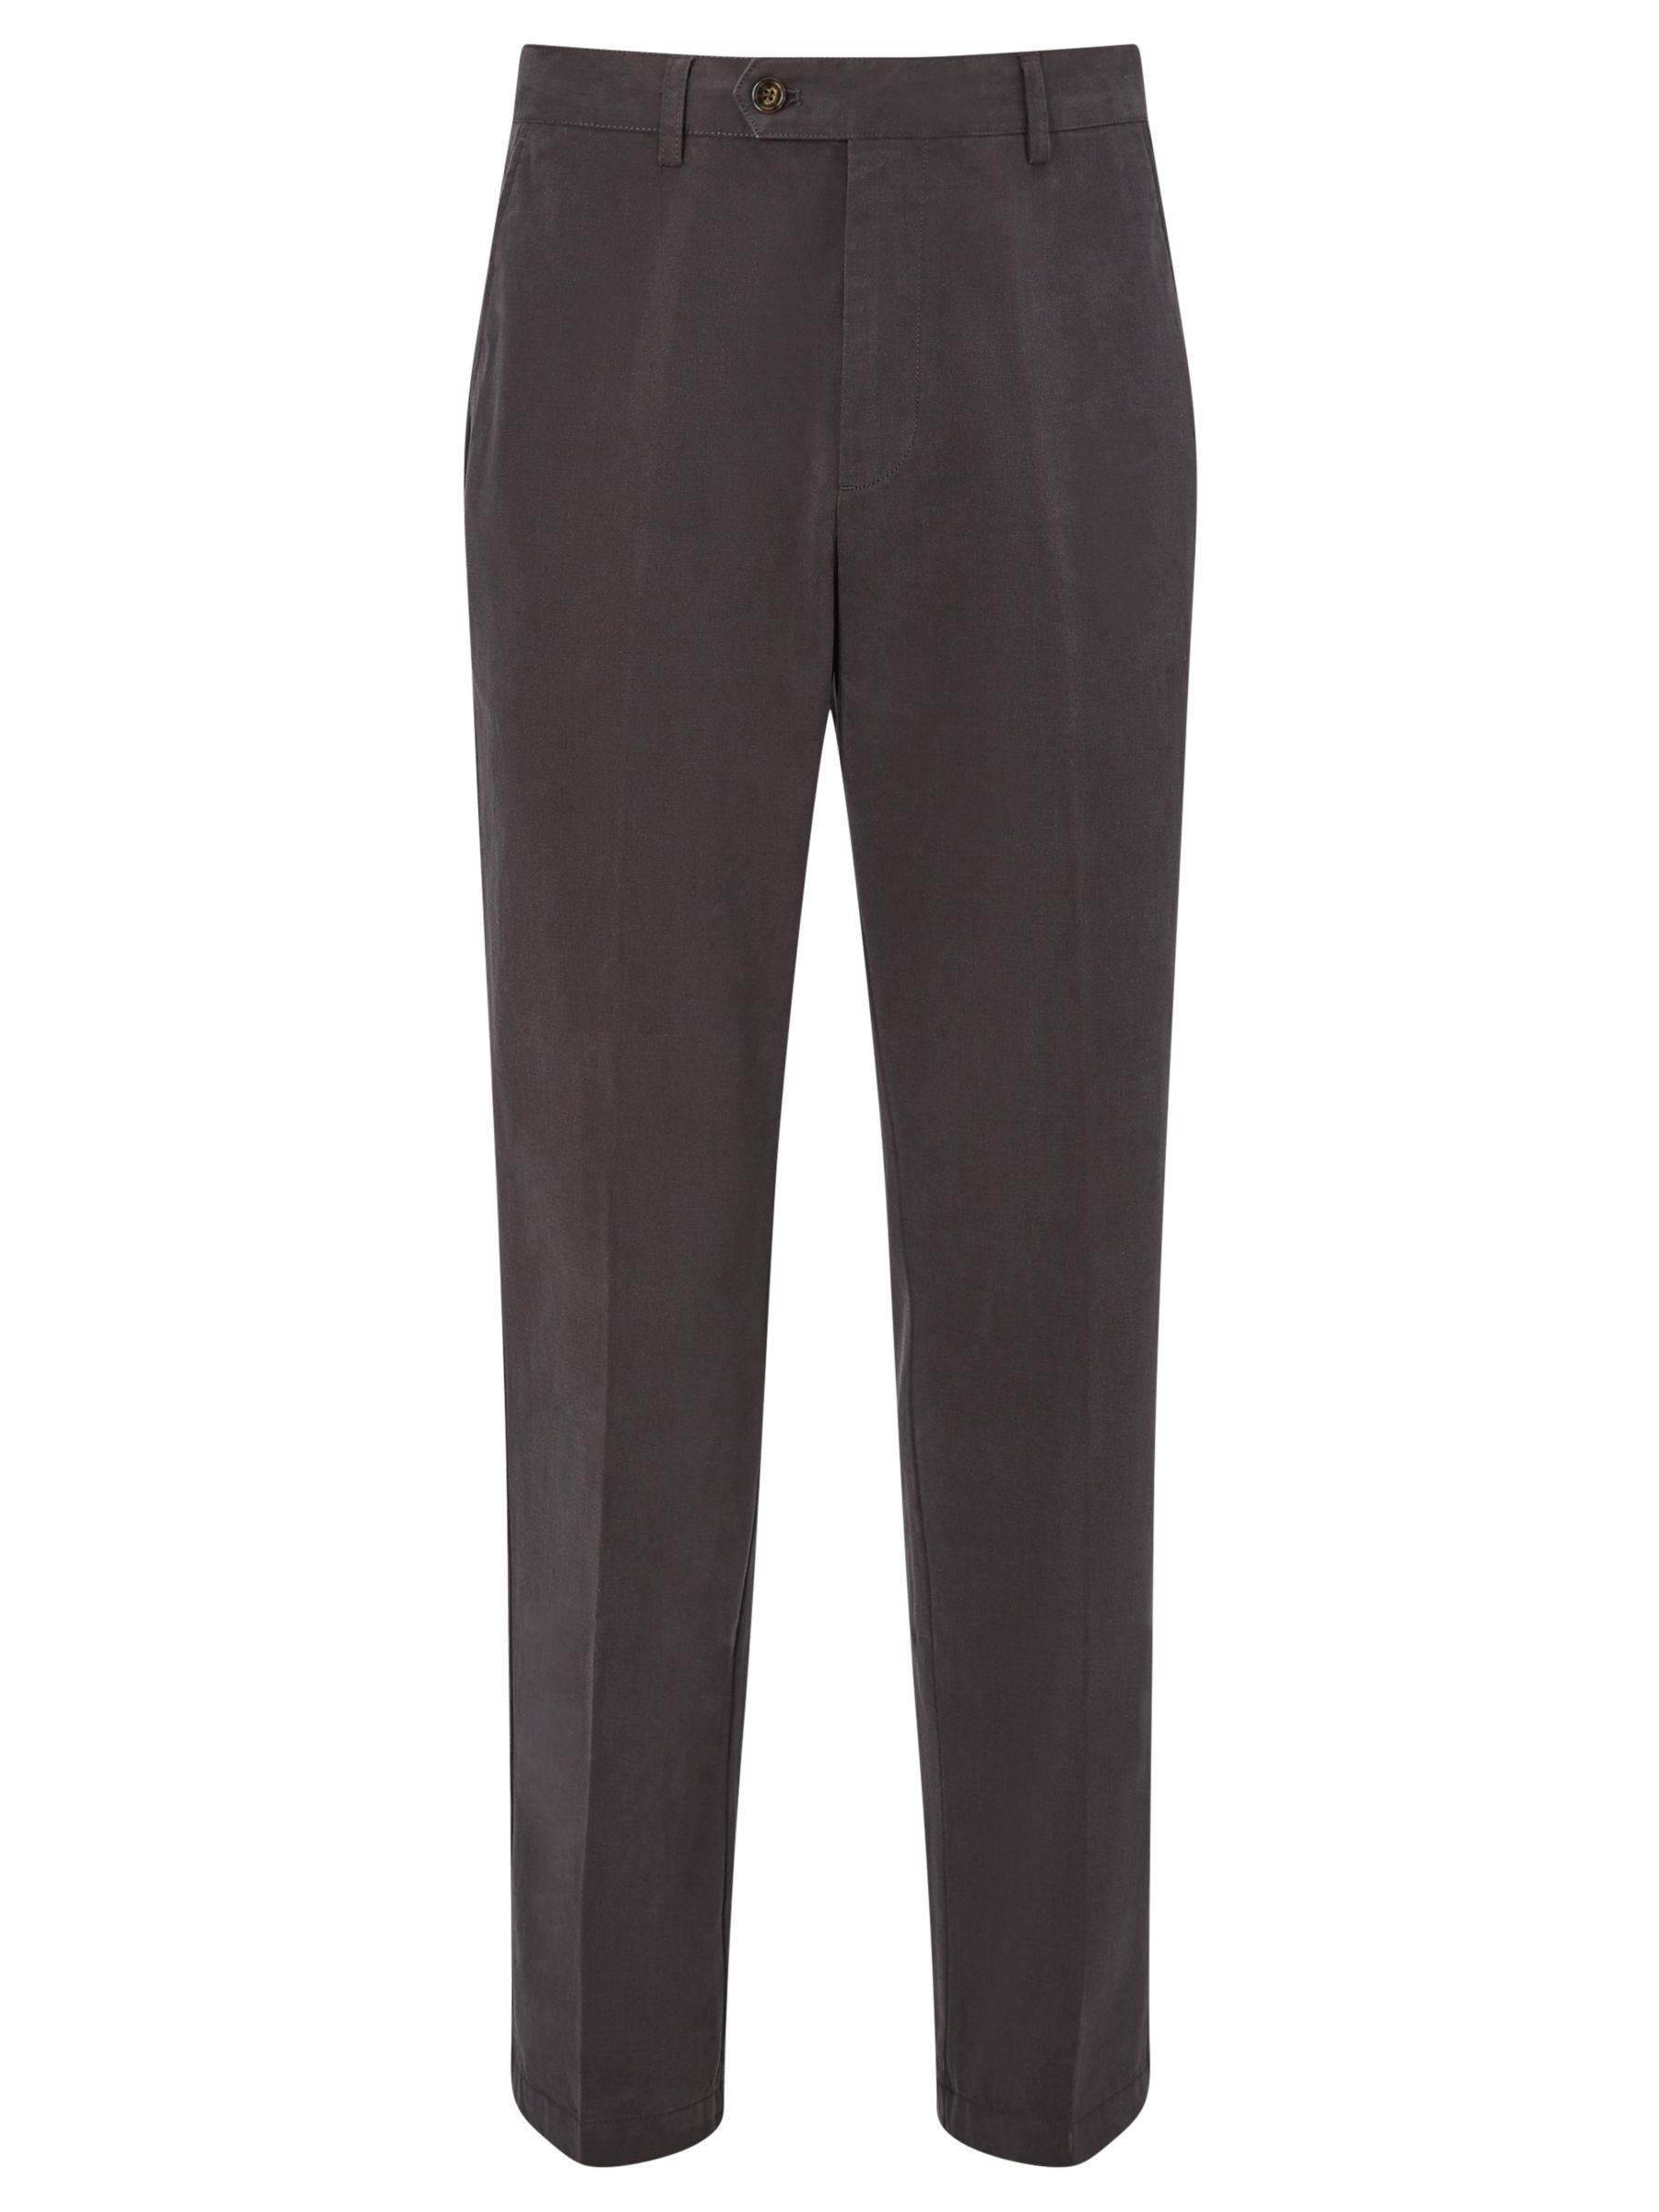 John Lewis & Partners Wrinkle Free Flat Front Trousers, Grey